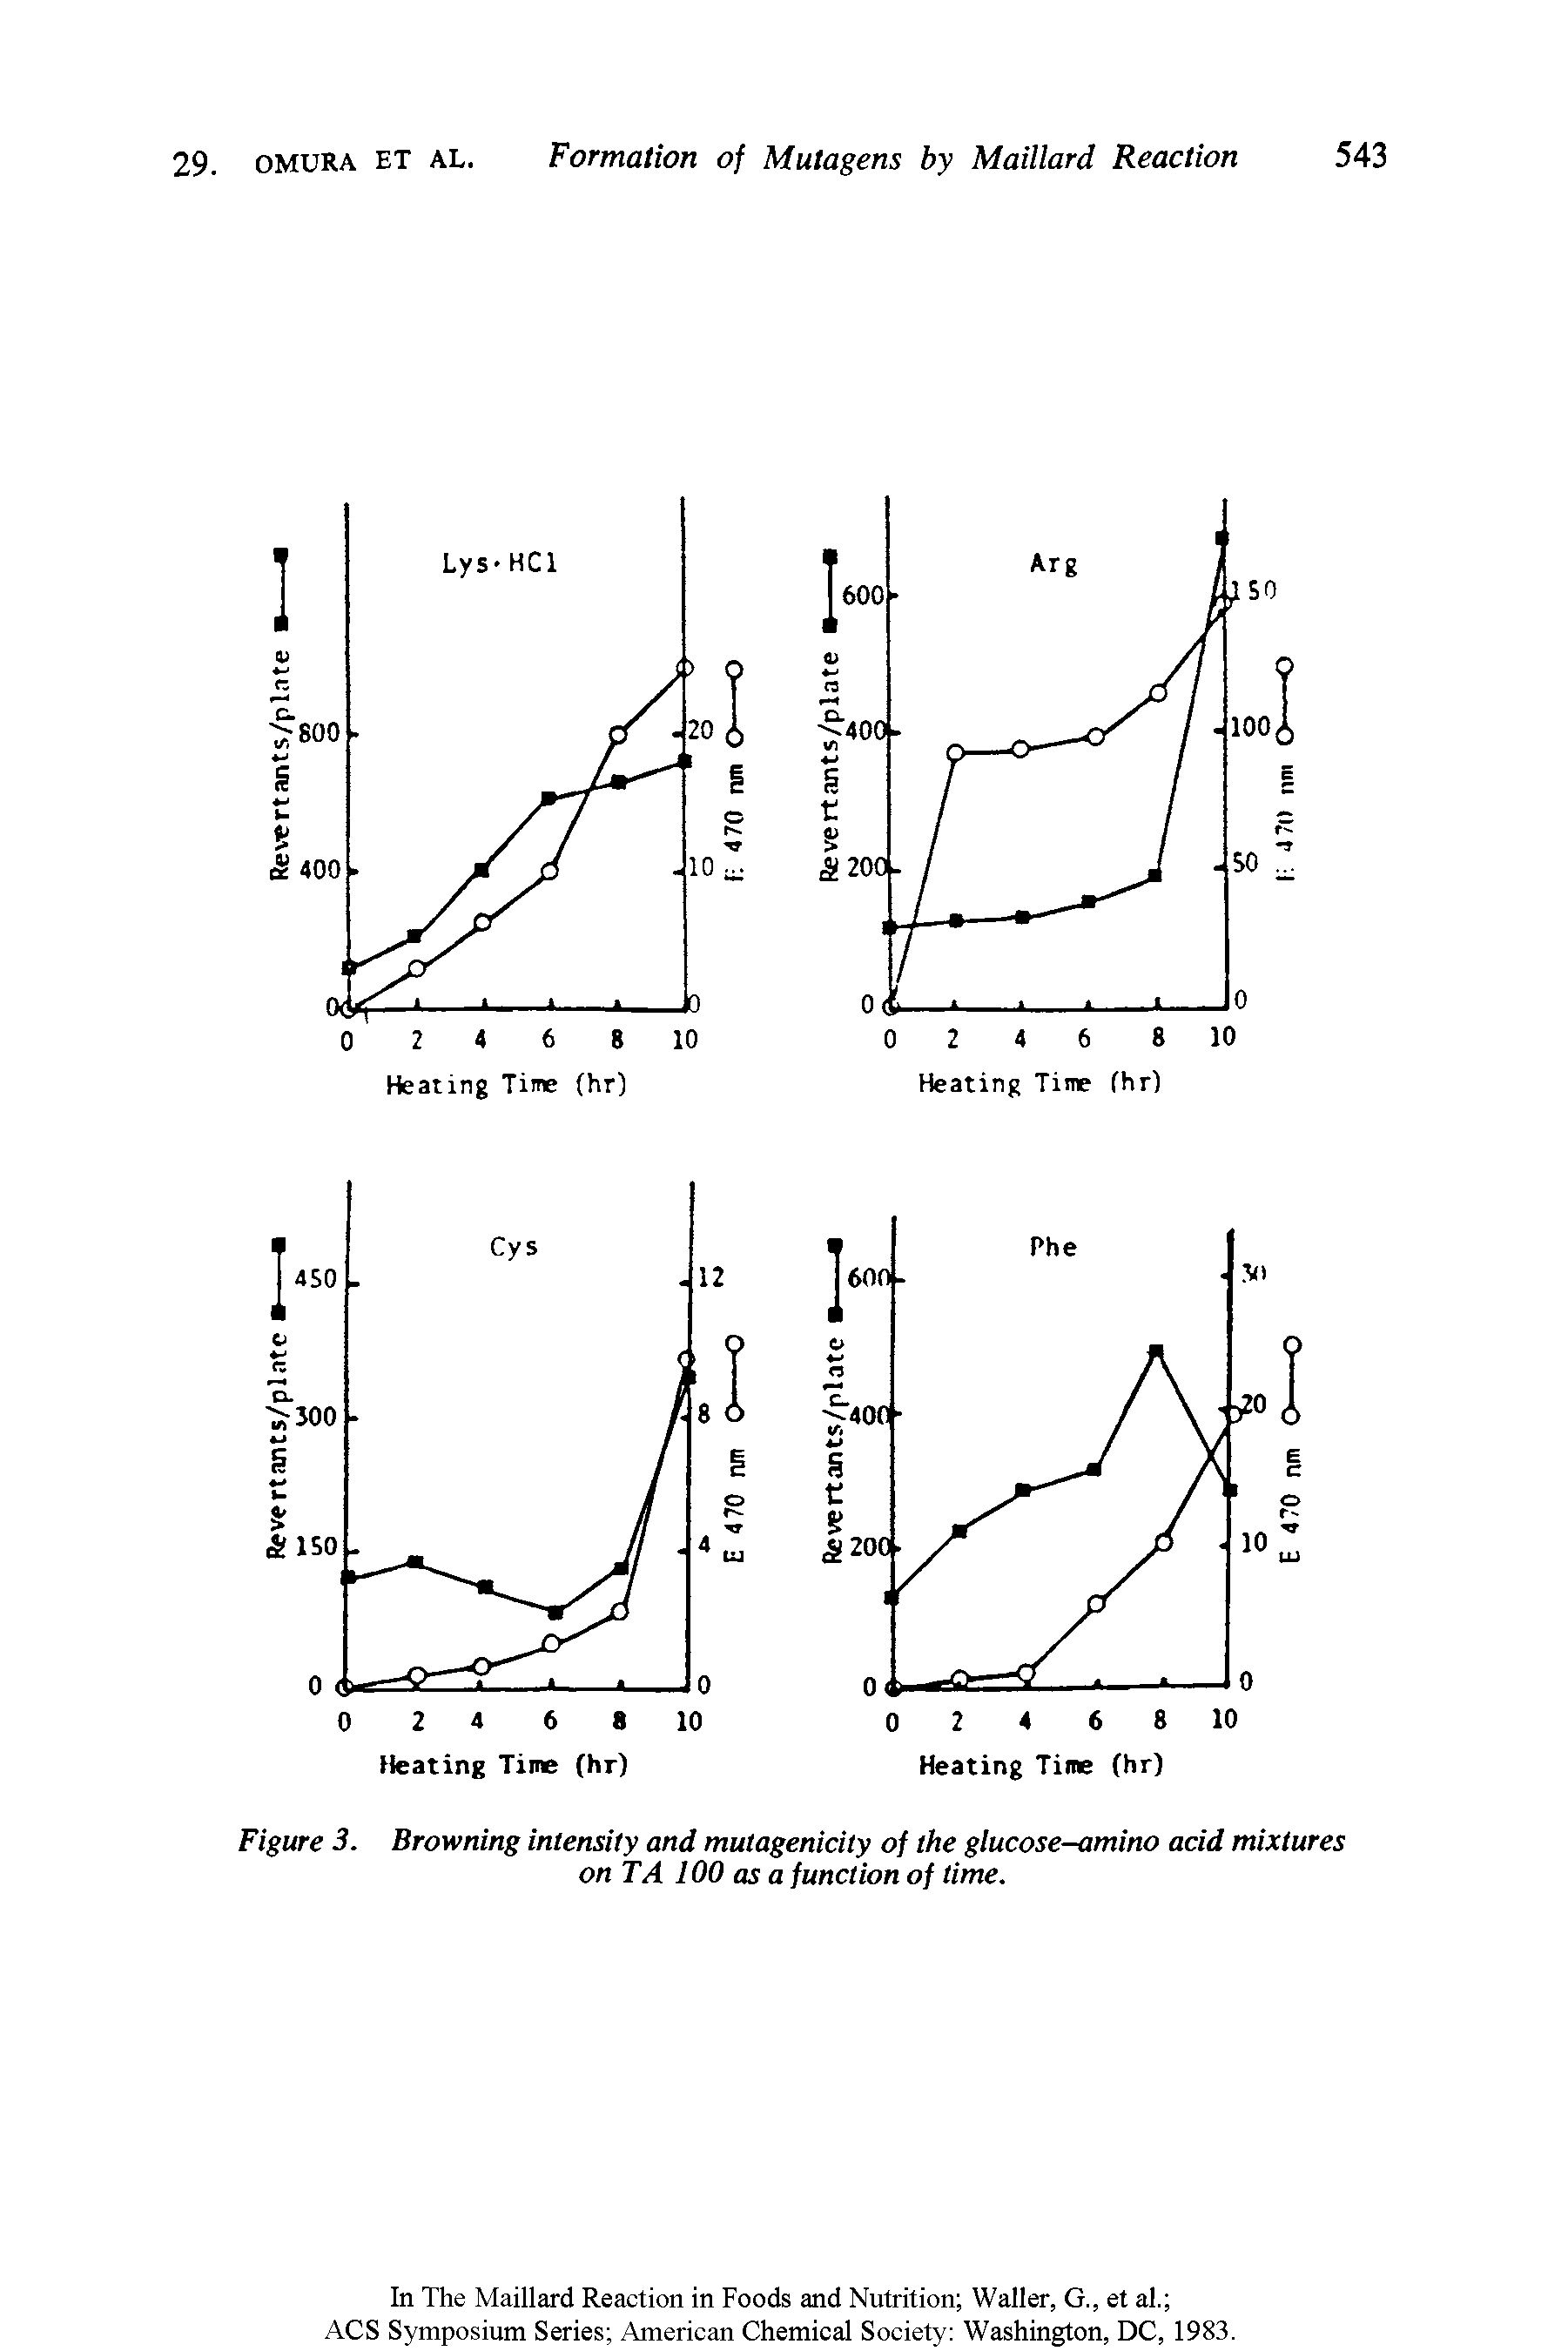 Figure 3. Browning intensity and mutagenicity of the glucose-amino acid mixtures on TA 100 as a function of time.